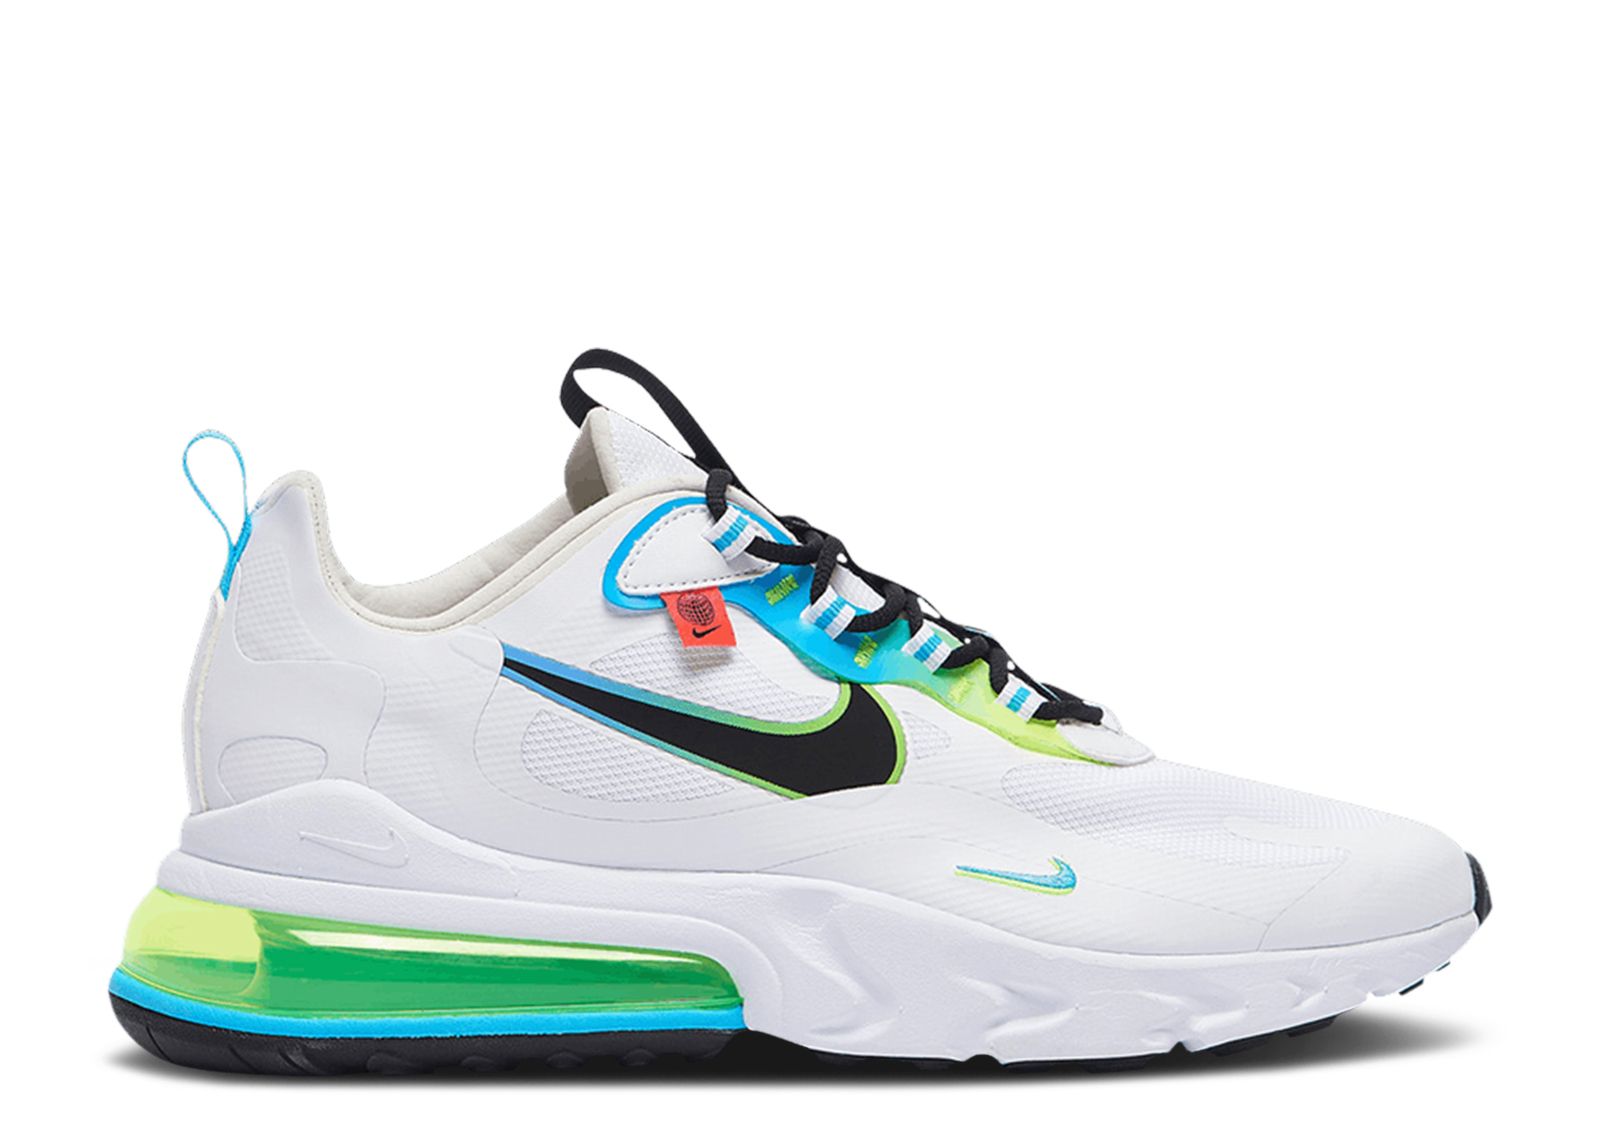 Кроссовки Nike Air Max 270 React 'Worldwide Pack - White', белый authentic nike air max 95 men cherry blossom worldwide pack yin yang running shoes original trainers sports sneakers runners